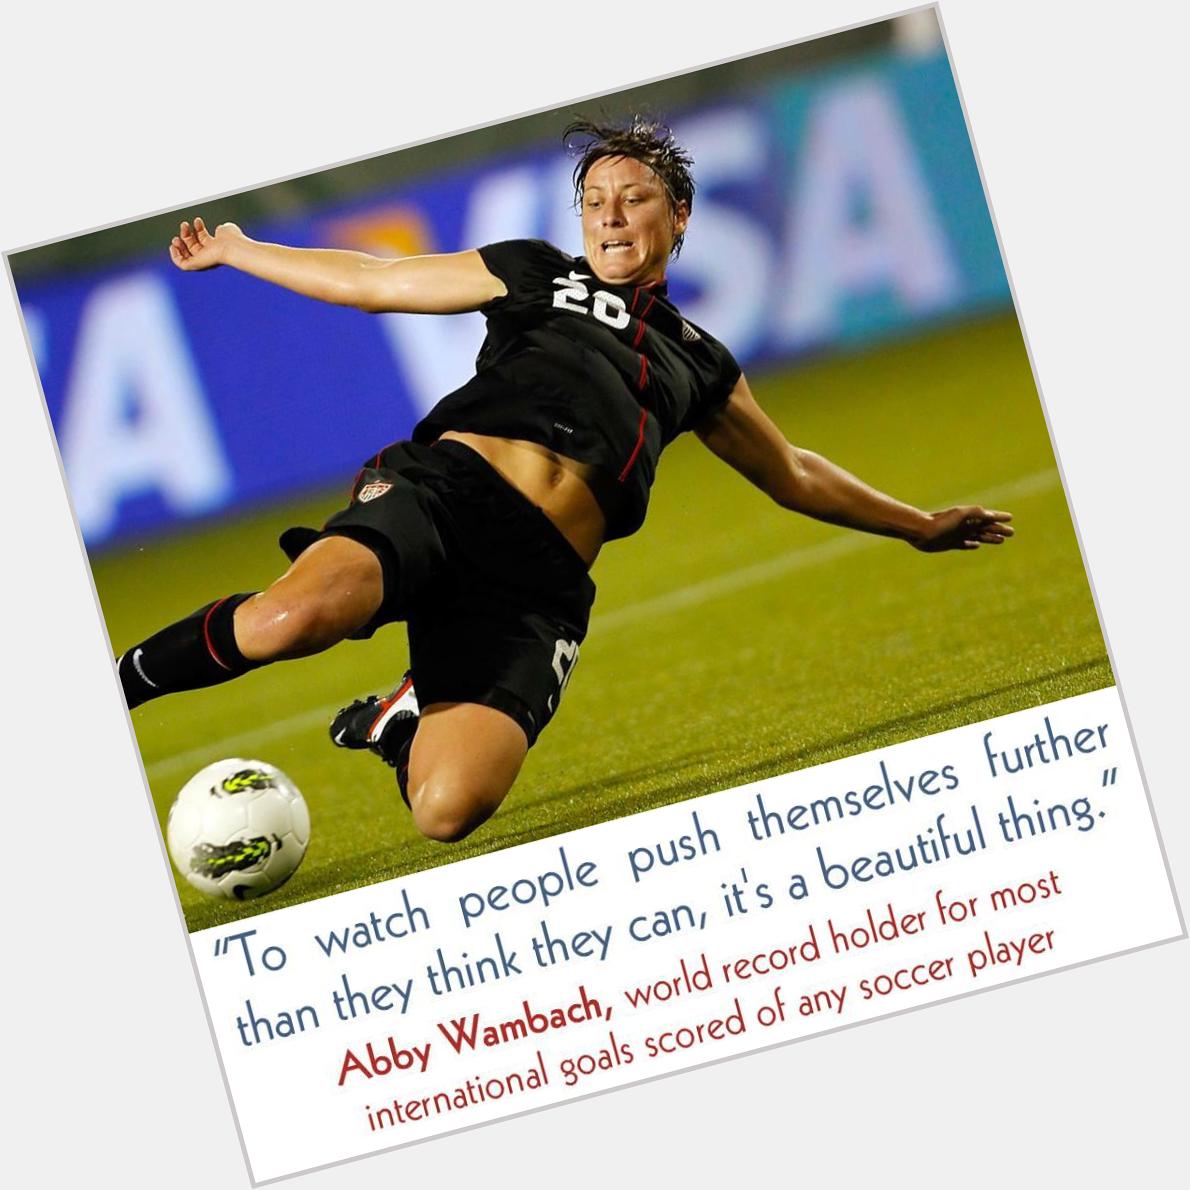 True statement! our student- athletes push themselves on and off the field everyday! Happy Bday to Abby Wambach! 